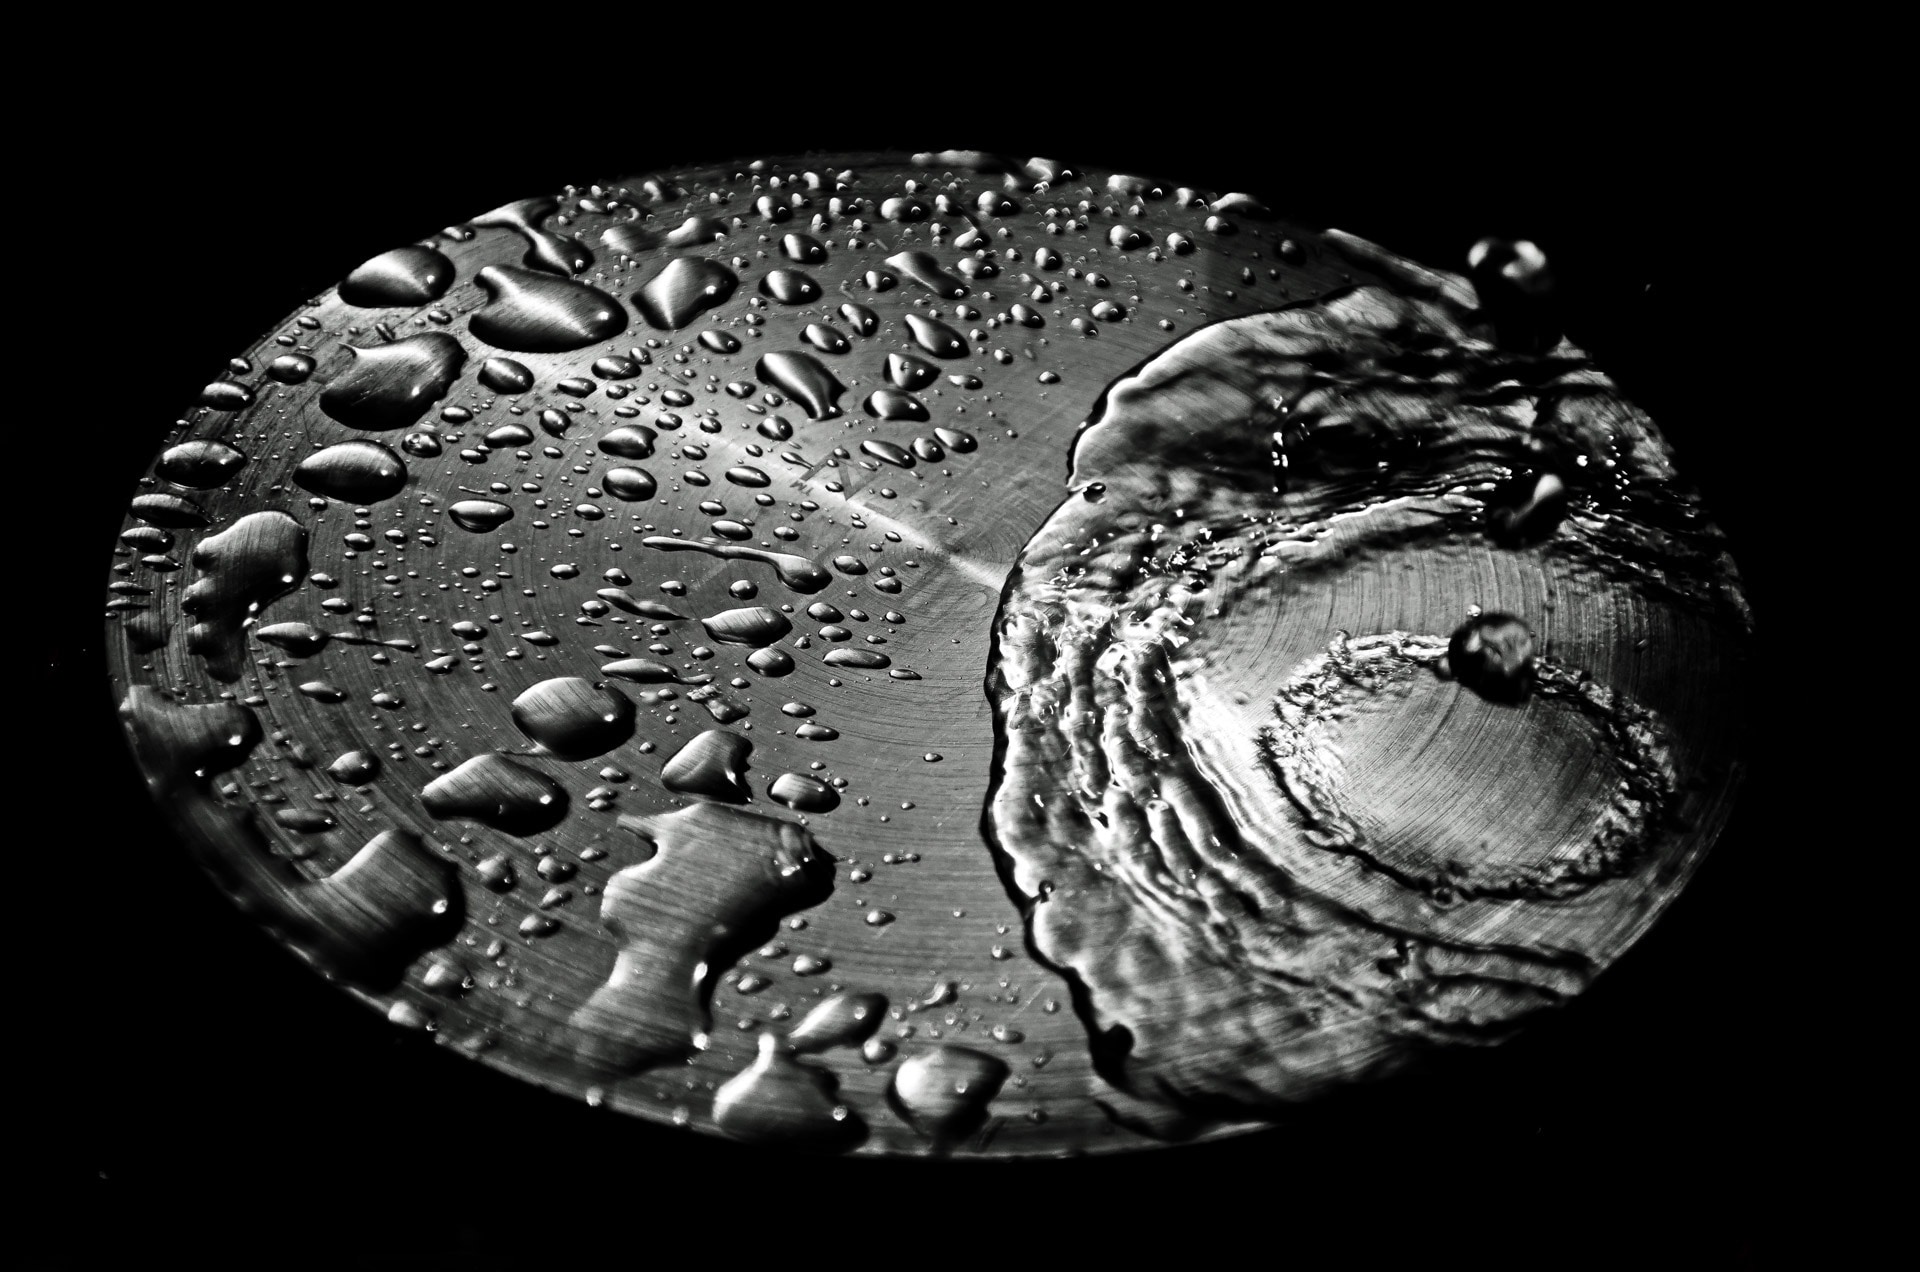 micro shot of water droplets